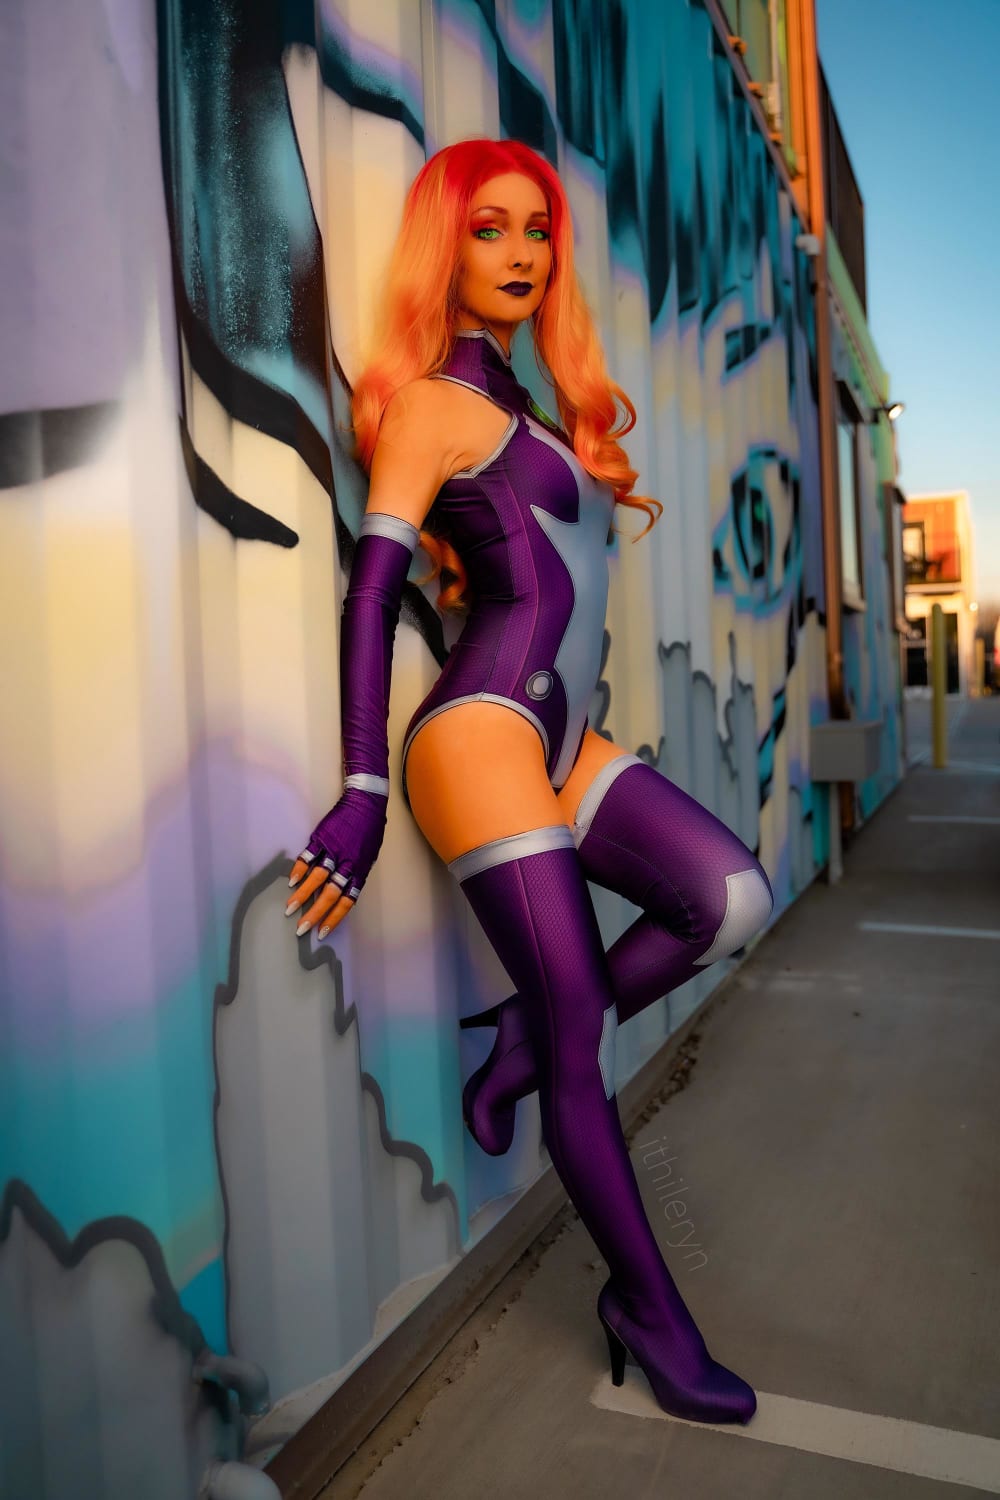 Starfire Teen Titans [cosplay] by me! Ithileryn cosplay. I am more of a Raven and cosplay her often, but so many requested I do SF I figured I’d give my favorite Cheeto girl a go!